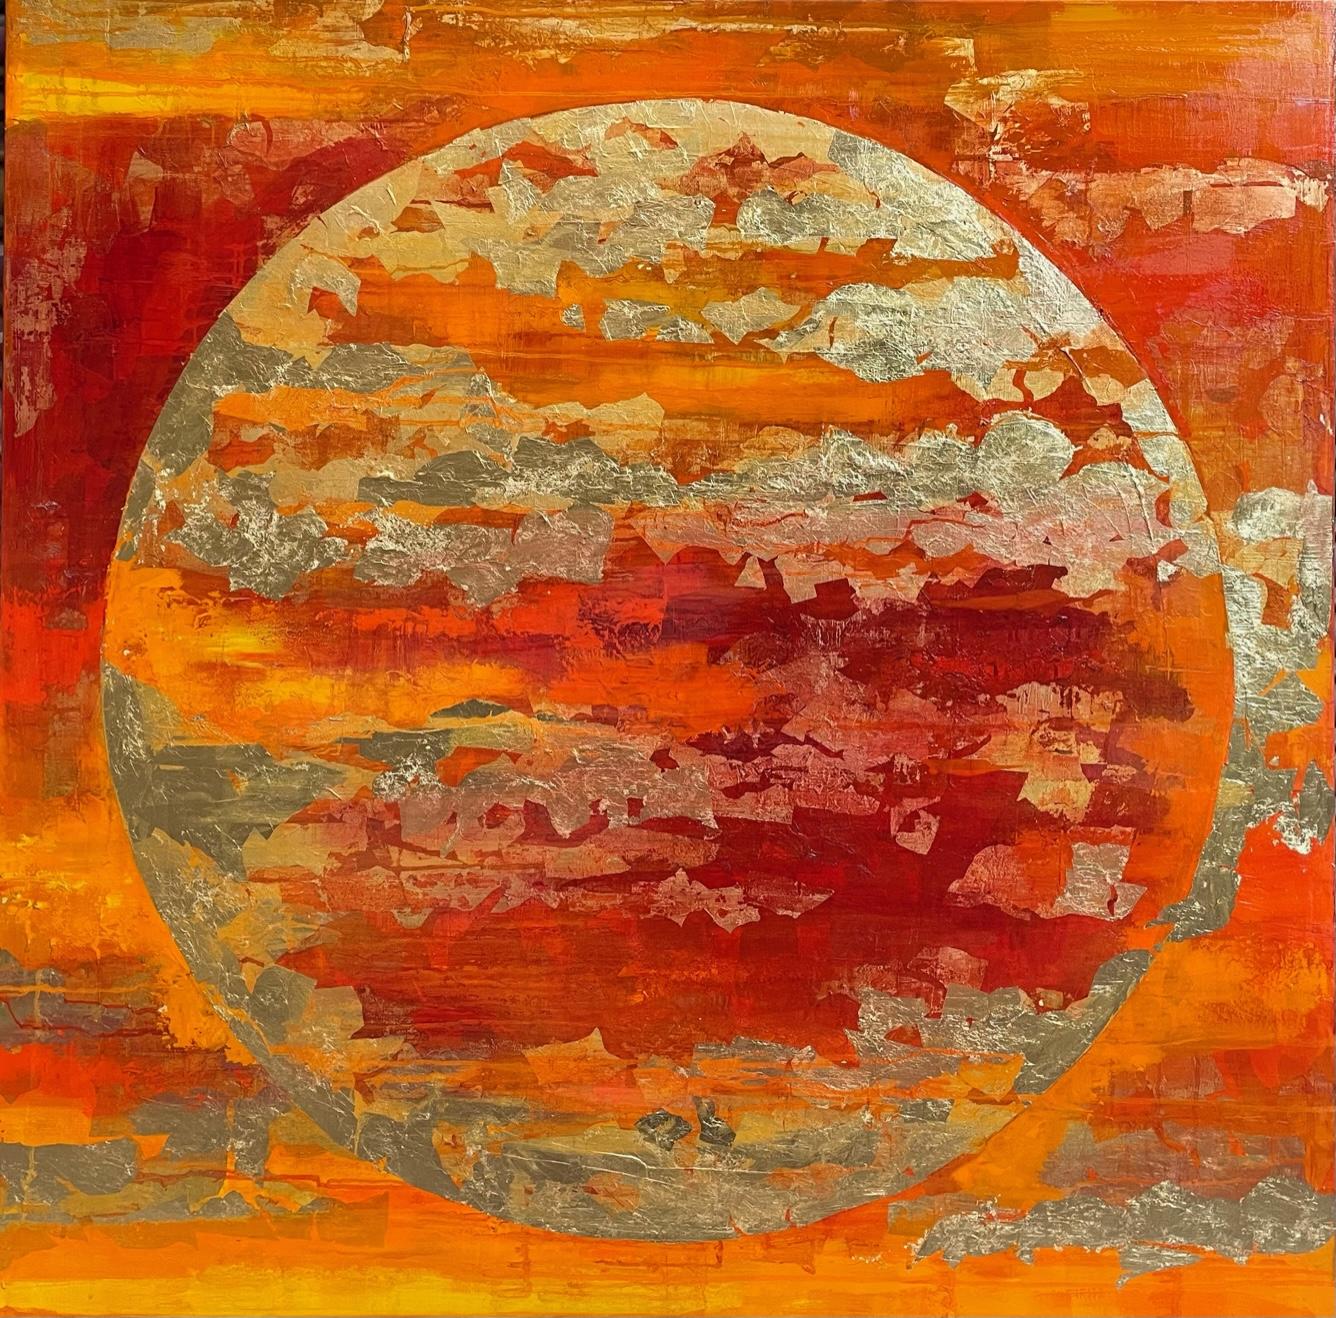 Chelsea Davine Abstract Painting - Autumn Meridian II - 21st Cent., Contemporary, Abstract, Oil Painting, Gold Leaf